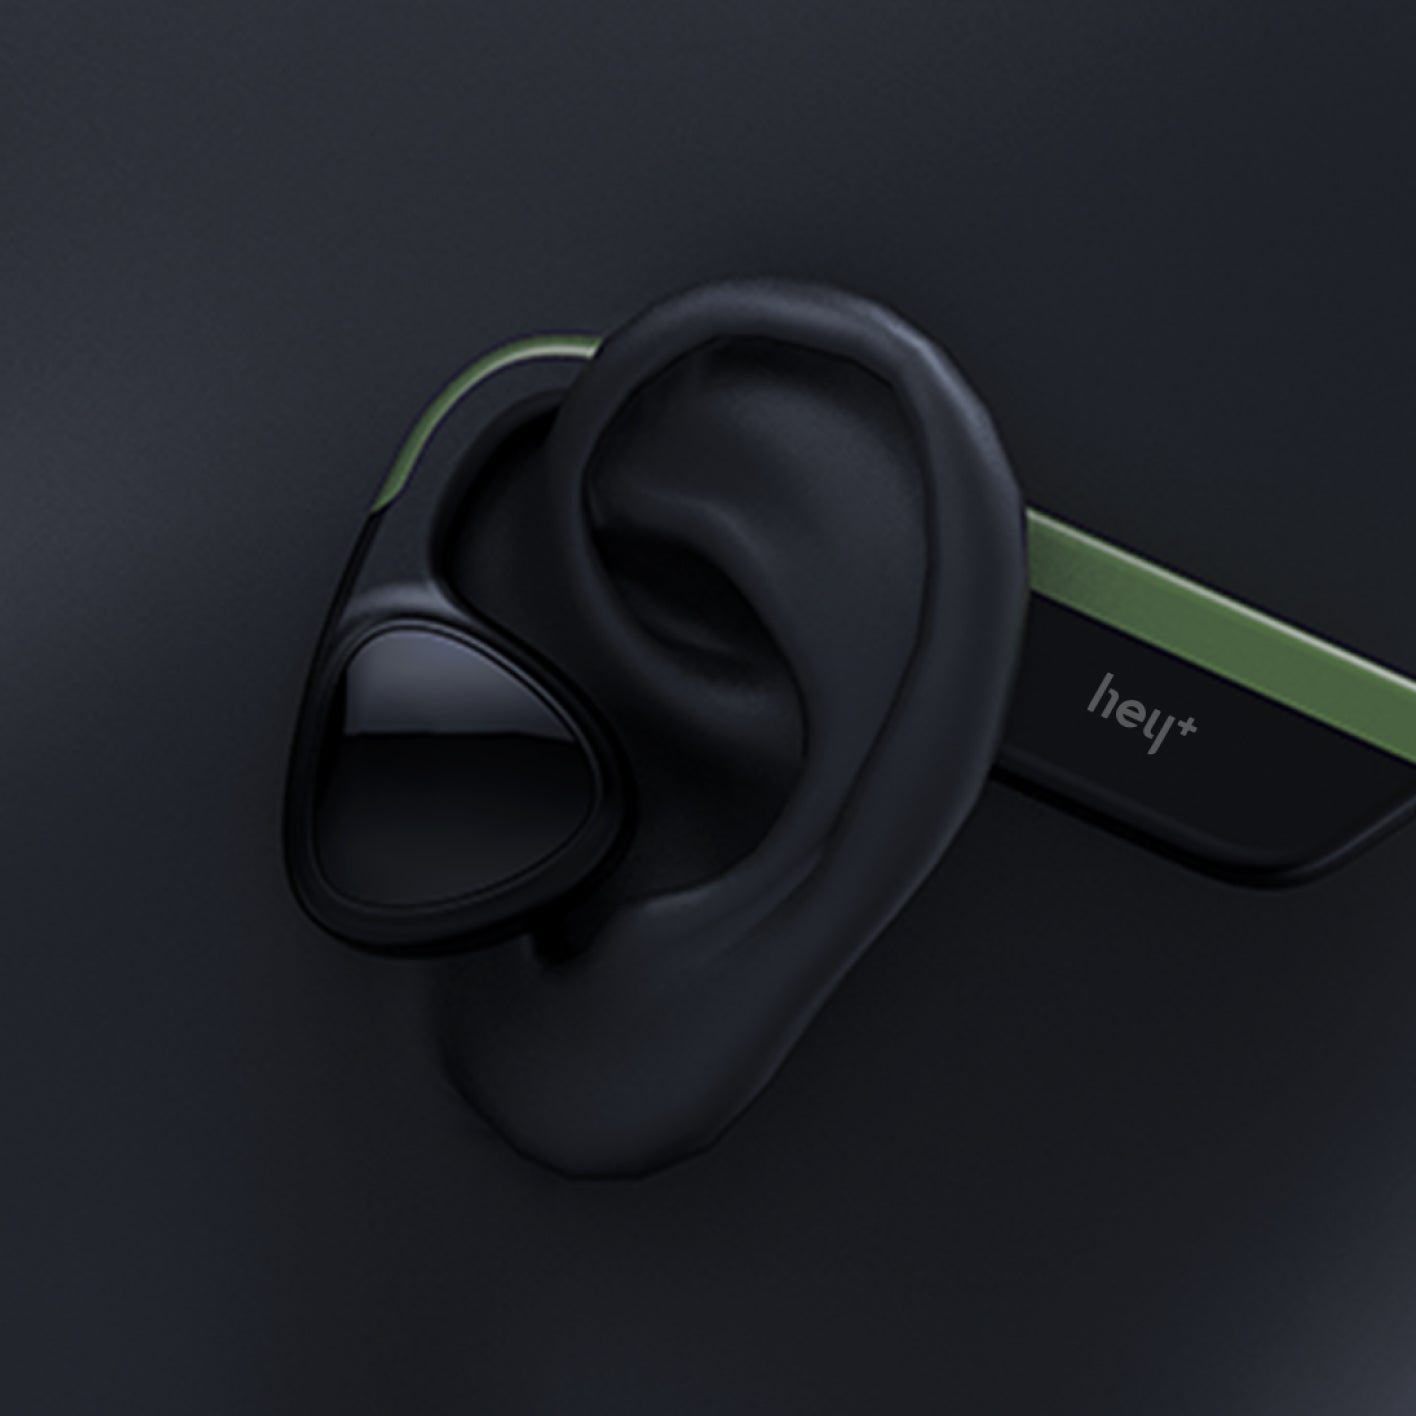 heyplus Runner is your safe and comfortable fitness buddy with open-ear bone conduction acoustics, featuring 33g ultra-light for comfortable wear, IP67 waterproof, Bluetooth 5.0, 16G memory for offline music playback, and more.